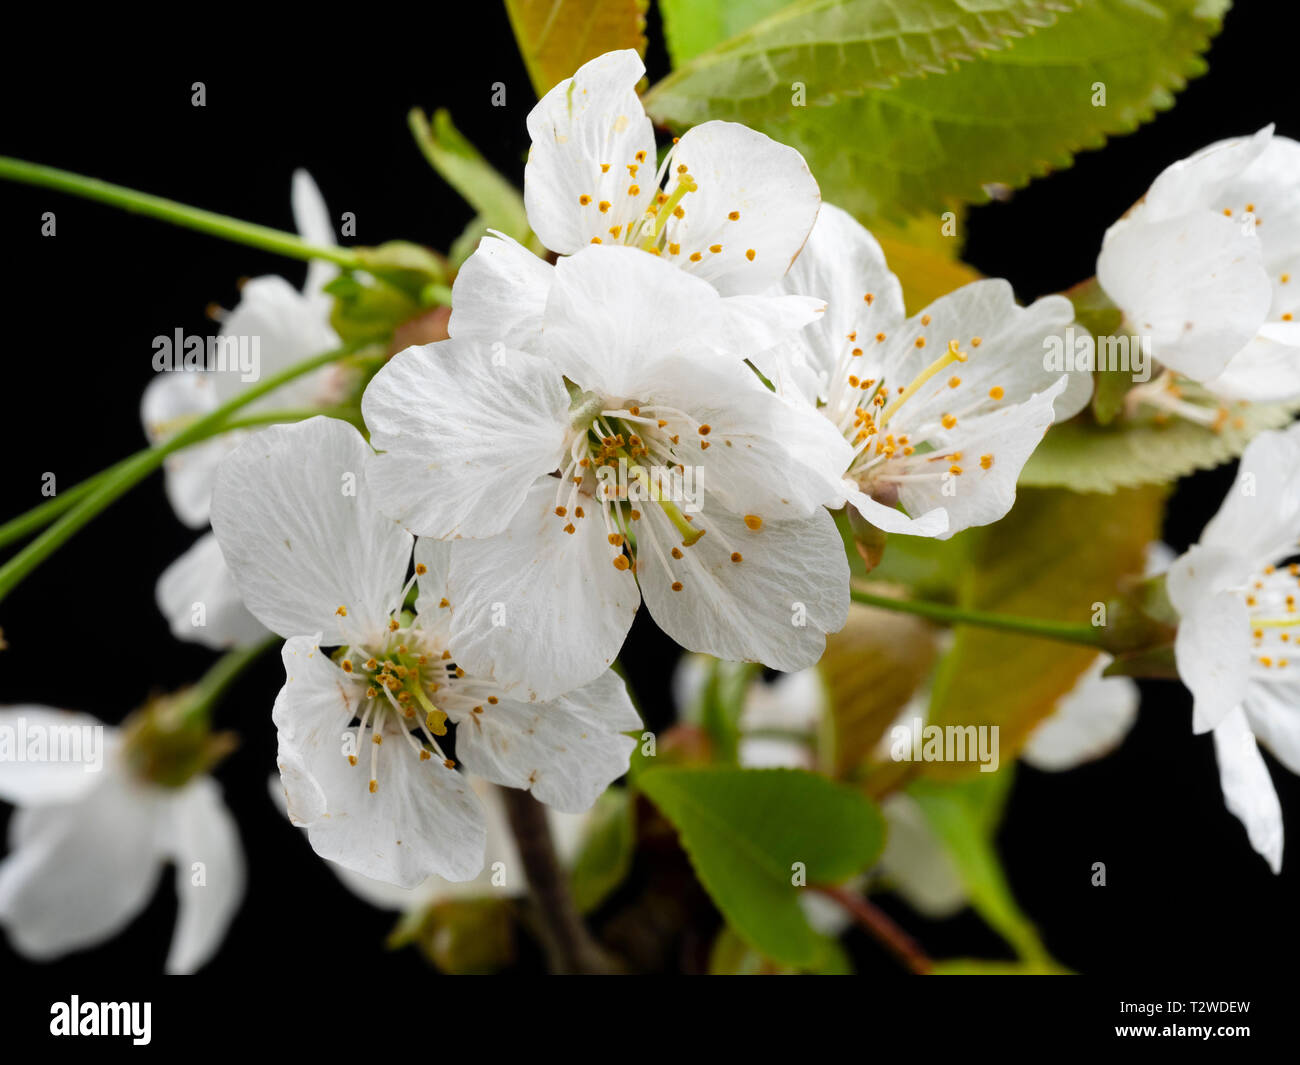 Close up of white single flowers of the wild cherry tree, Prunus avium, in early spring bloom against a black background Stock Photo